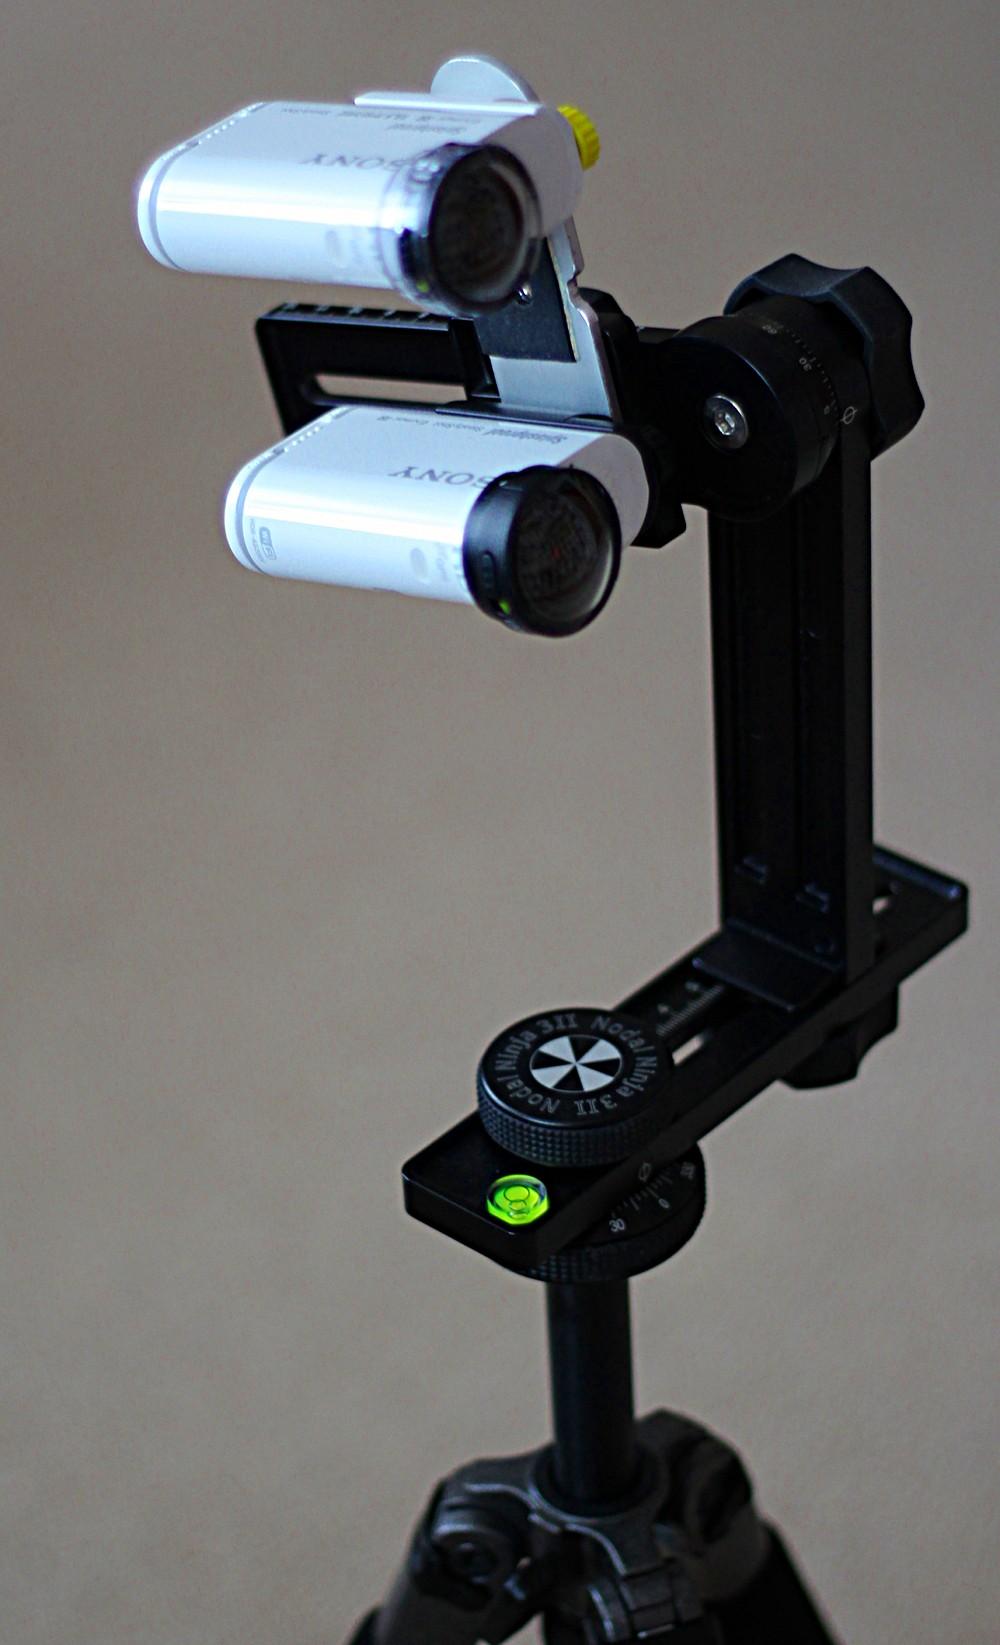 Figure 3: Sony Actioncameras on Nodal Ninja mount. The second parallel camera is used to take depth images.